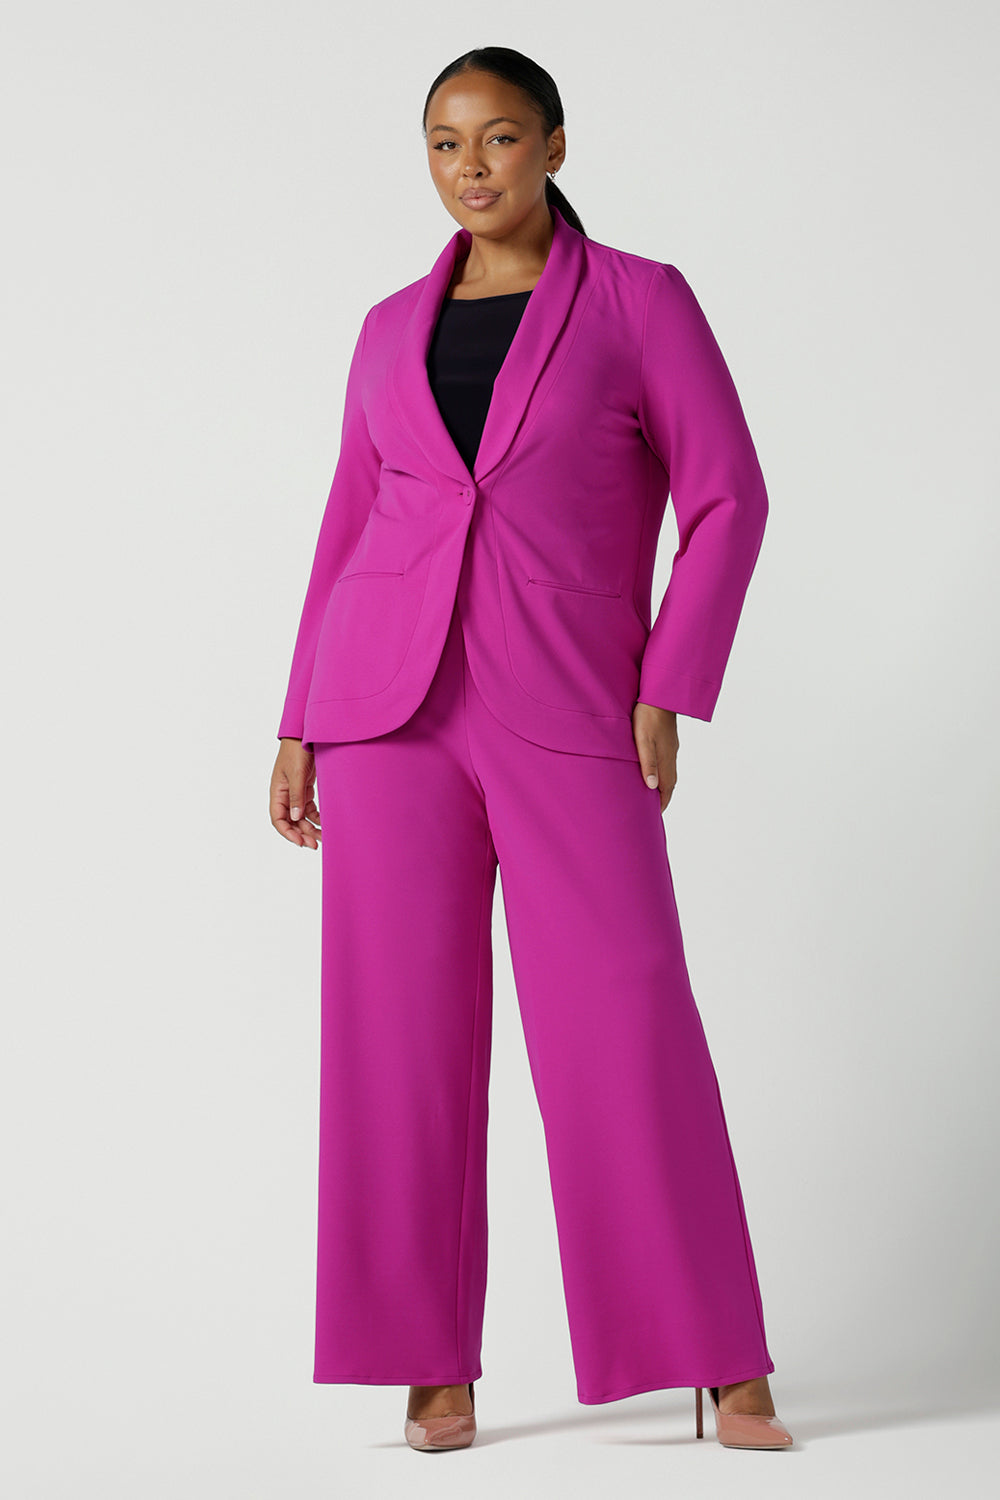 Size 16 woman wears a fuchsia Merit Blazer in scuba crepe. Tailored design with self covered buttons, shawl collar and curved hem and pockets. Size inclusive for stylish corporate workwear for women. Size 8 - 24.